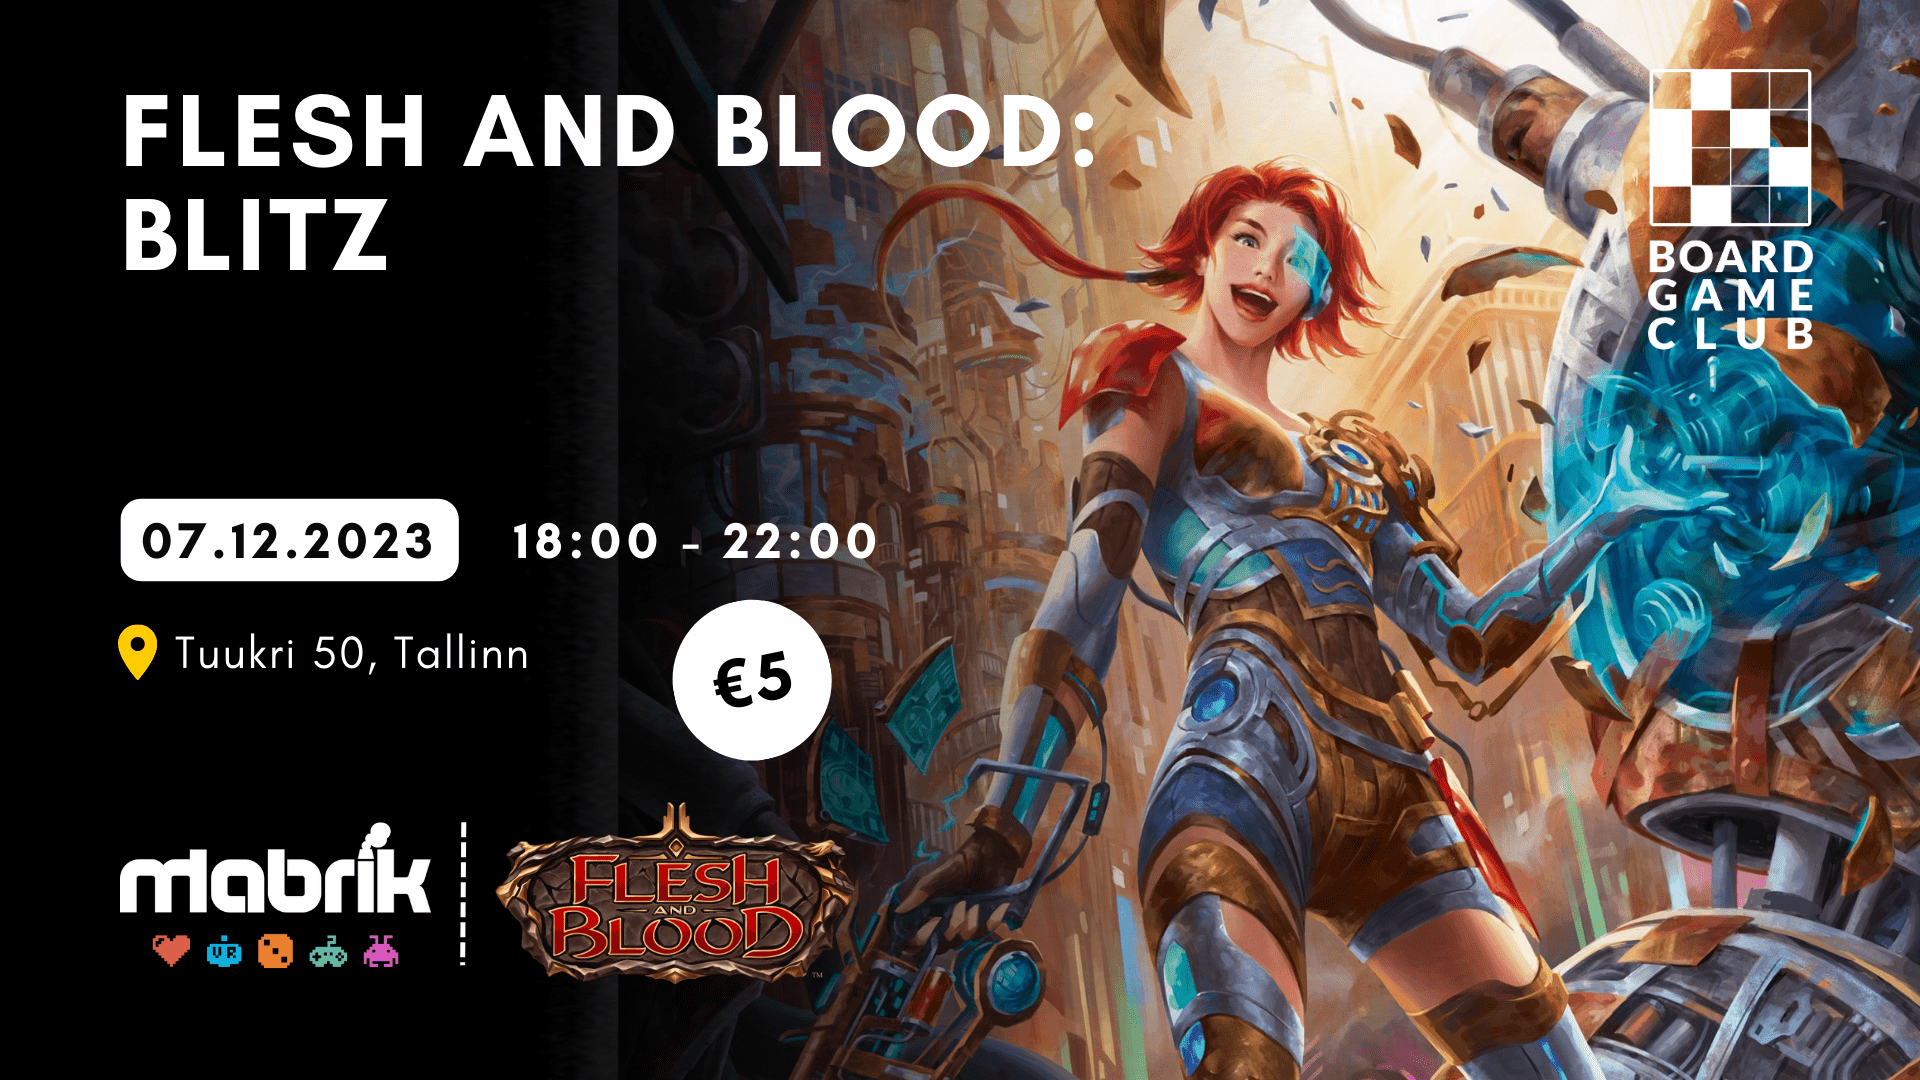 Events - 07.12.2023 - Flesh And Blood: Blitz